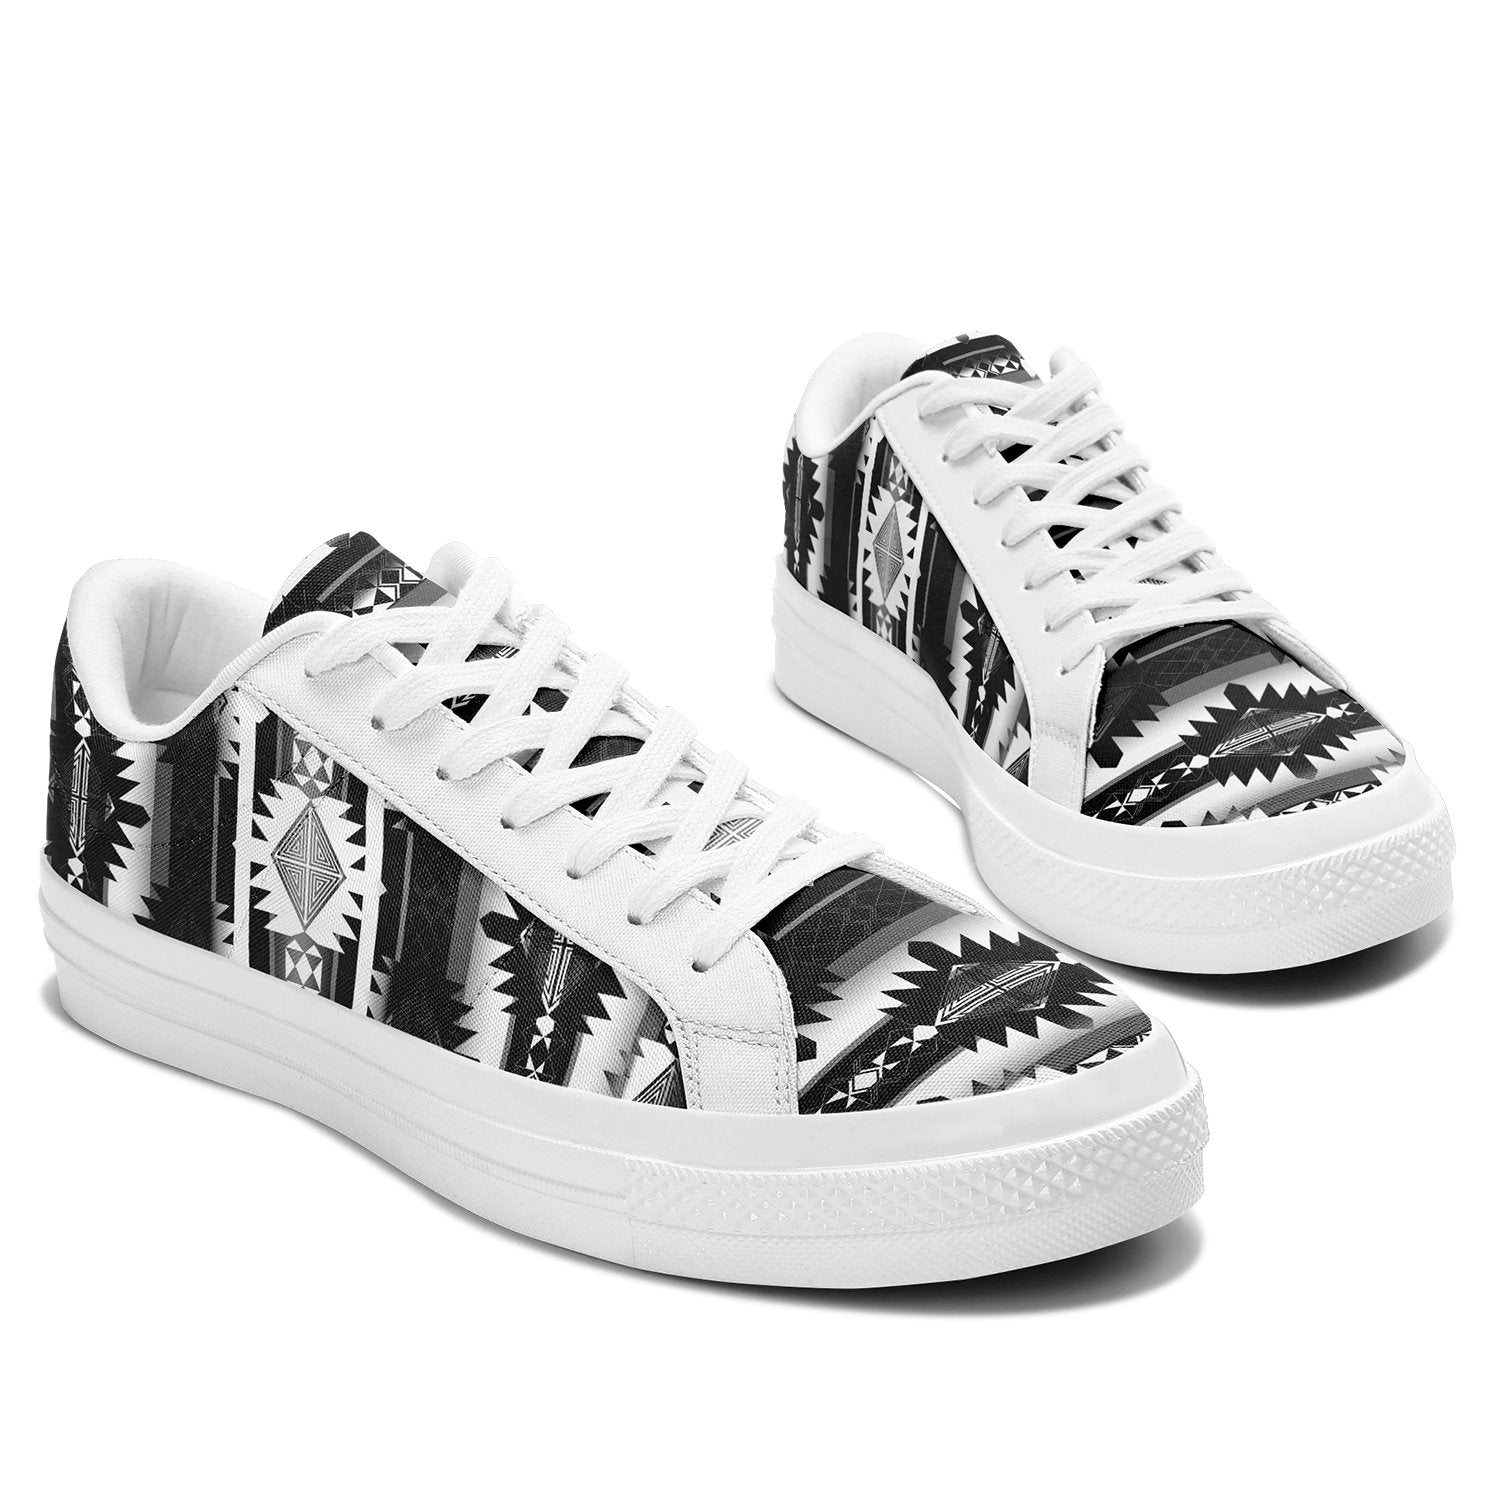 Okotoks Black and White Aapisi Low Top Canvas Shoes White Sole 49 Dzine 